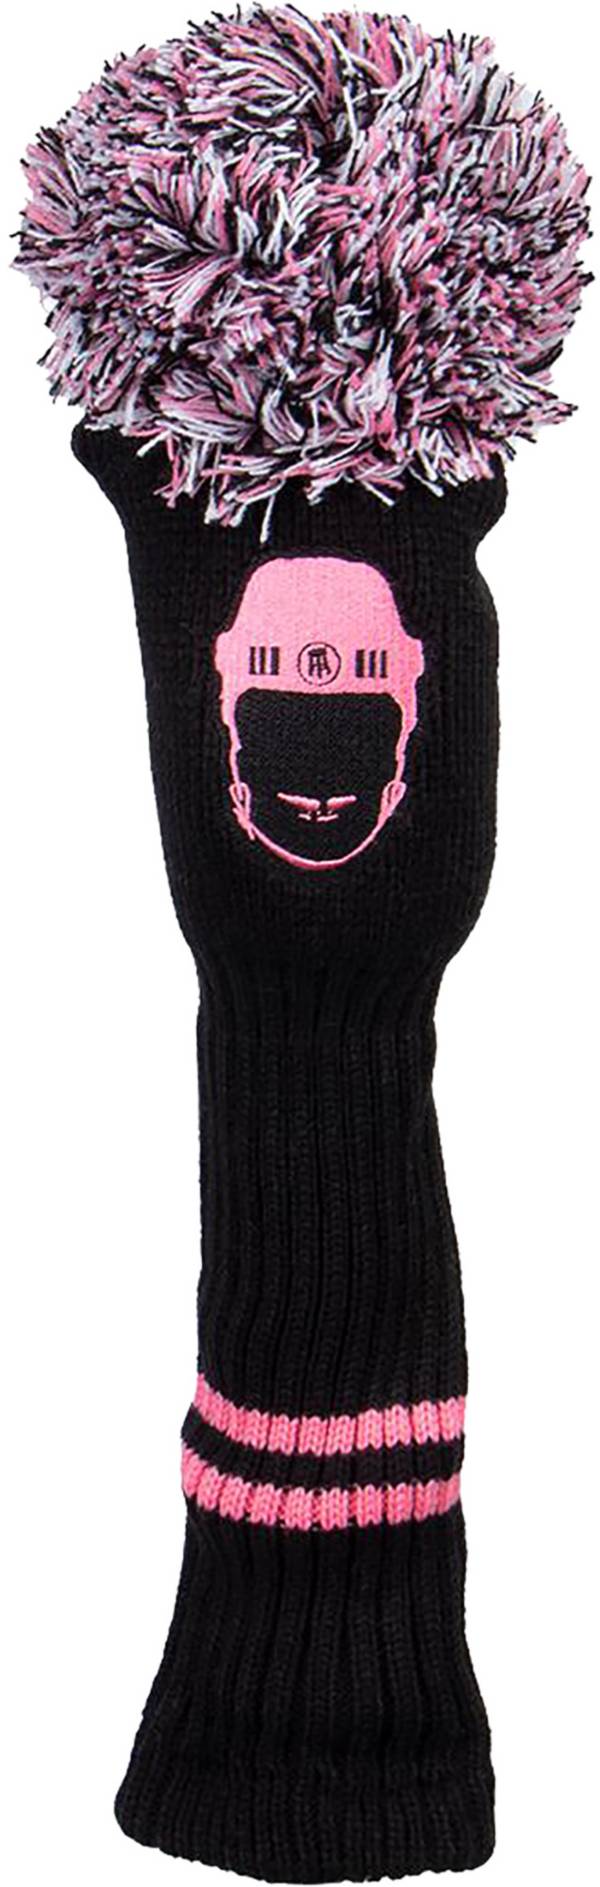 Barstool Sports Pink Whitney Knit Driver Headcover product image